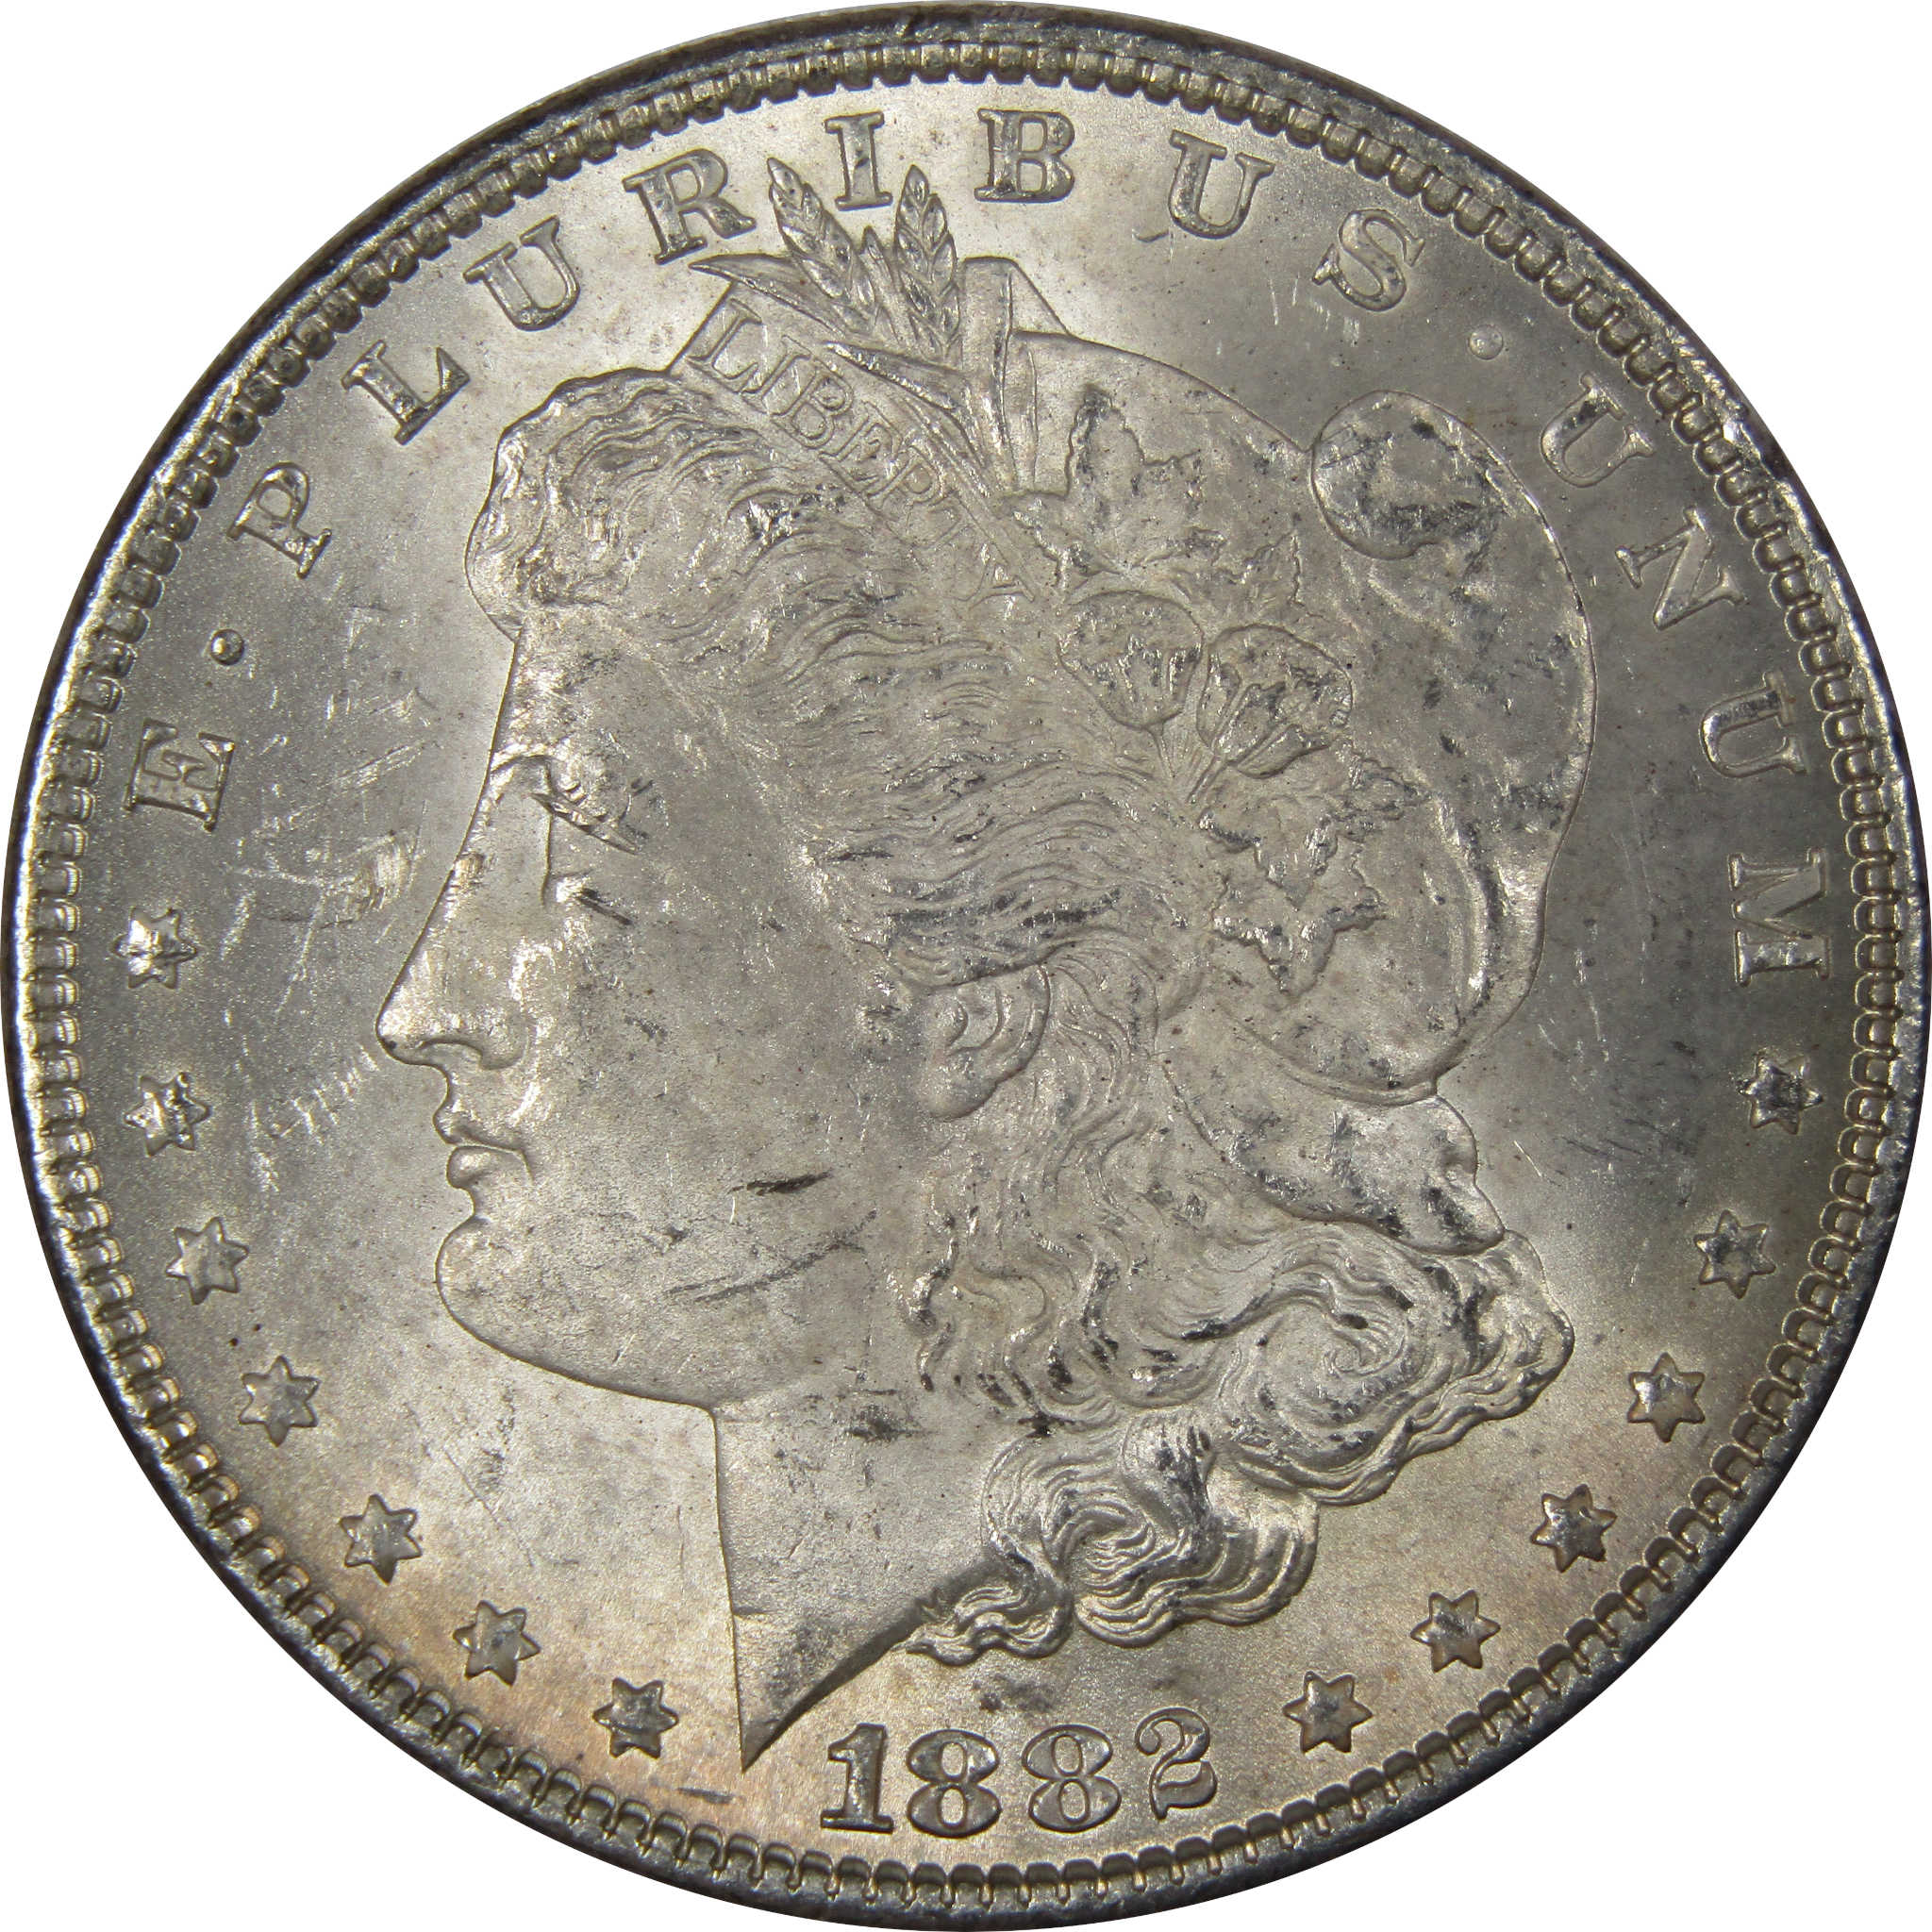 1882 Morgan Dollar BU Uncirculated Mint State 90% Silver SKU:IPC9646 - Morgan coin - Morgan silver dollar - Morgan silver dollar for sale - Profile Coins &amp; Collectibles